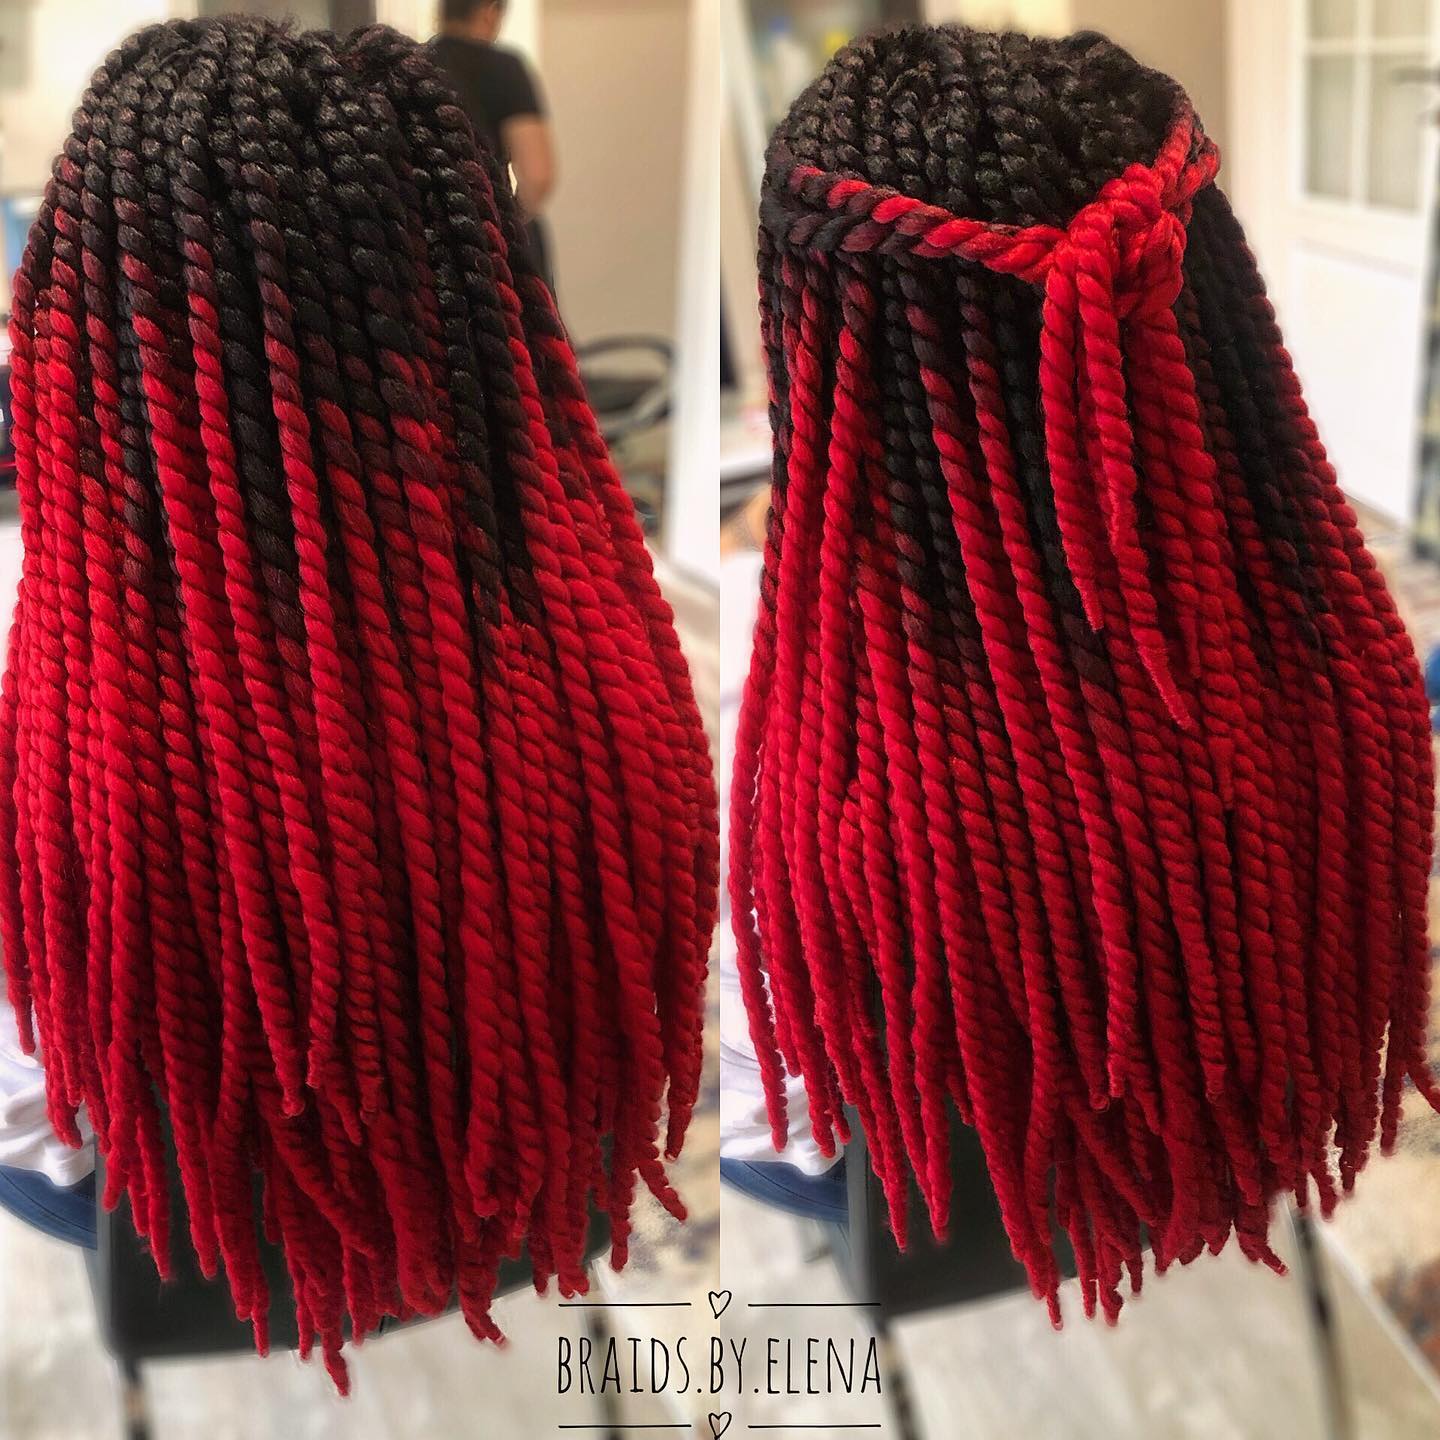 Black to Red Ombre Twist Hairstyle on Long Thick Hair